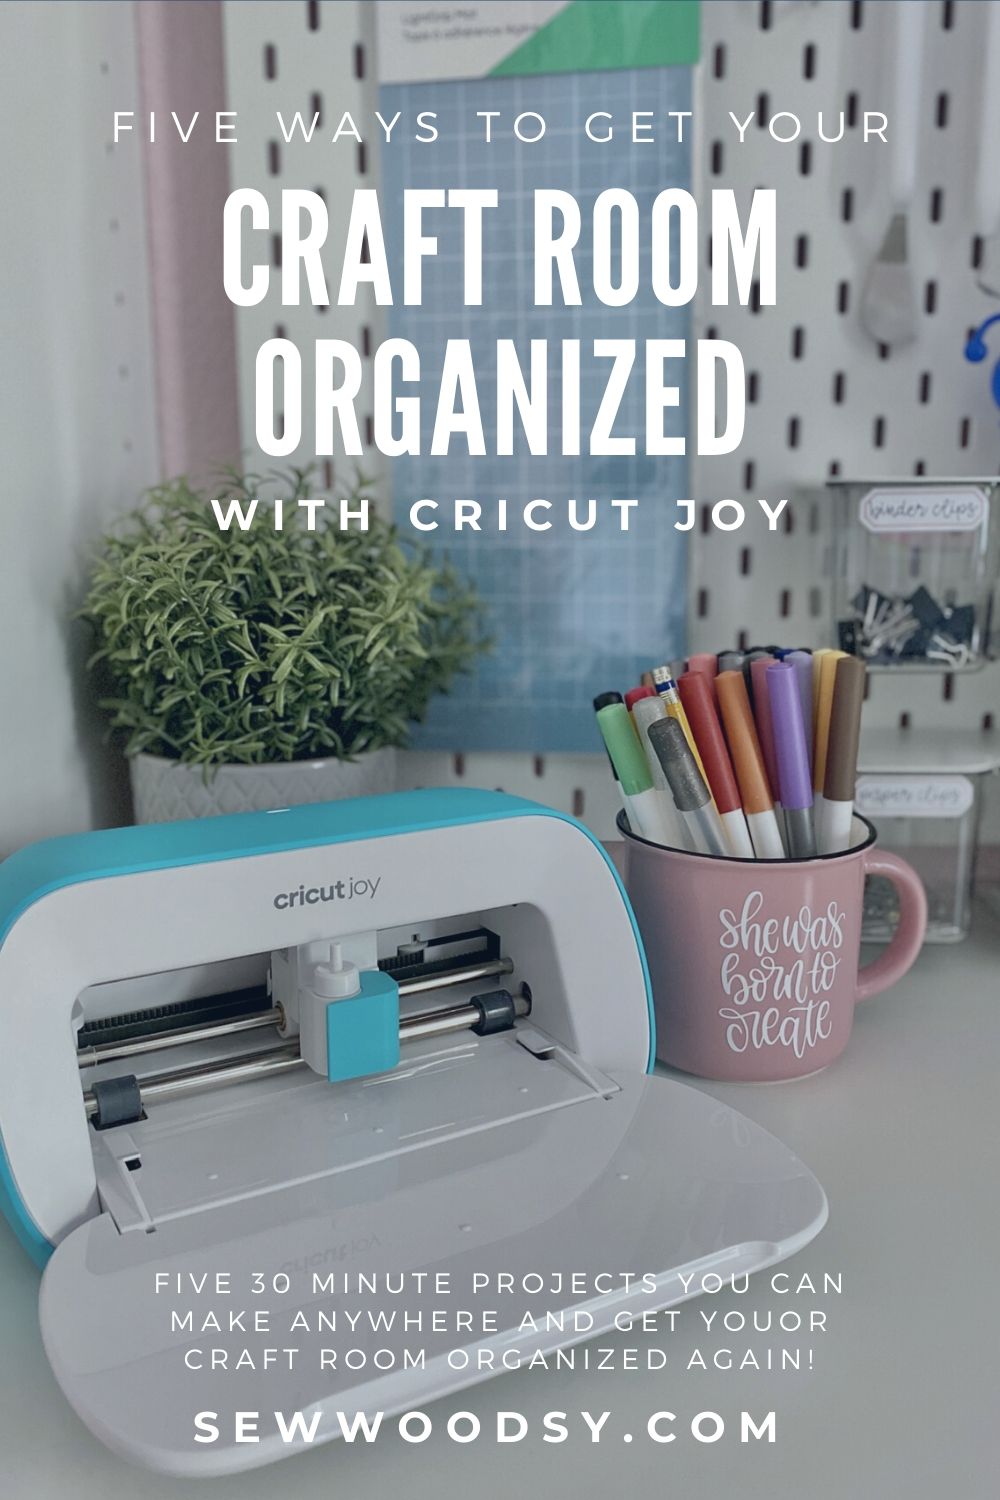 Faded photo of Cricut Joy and supplies with text on image.